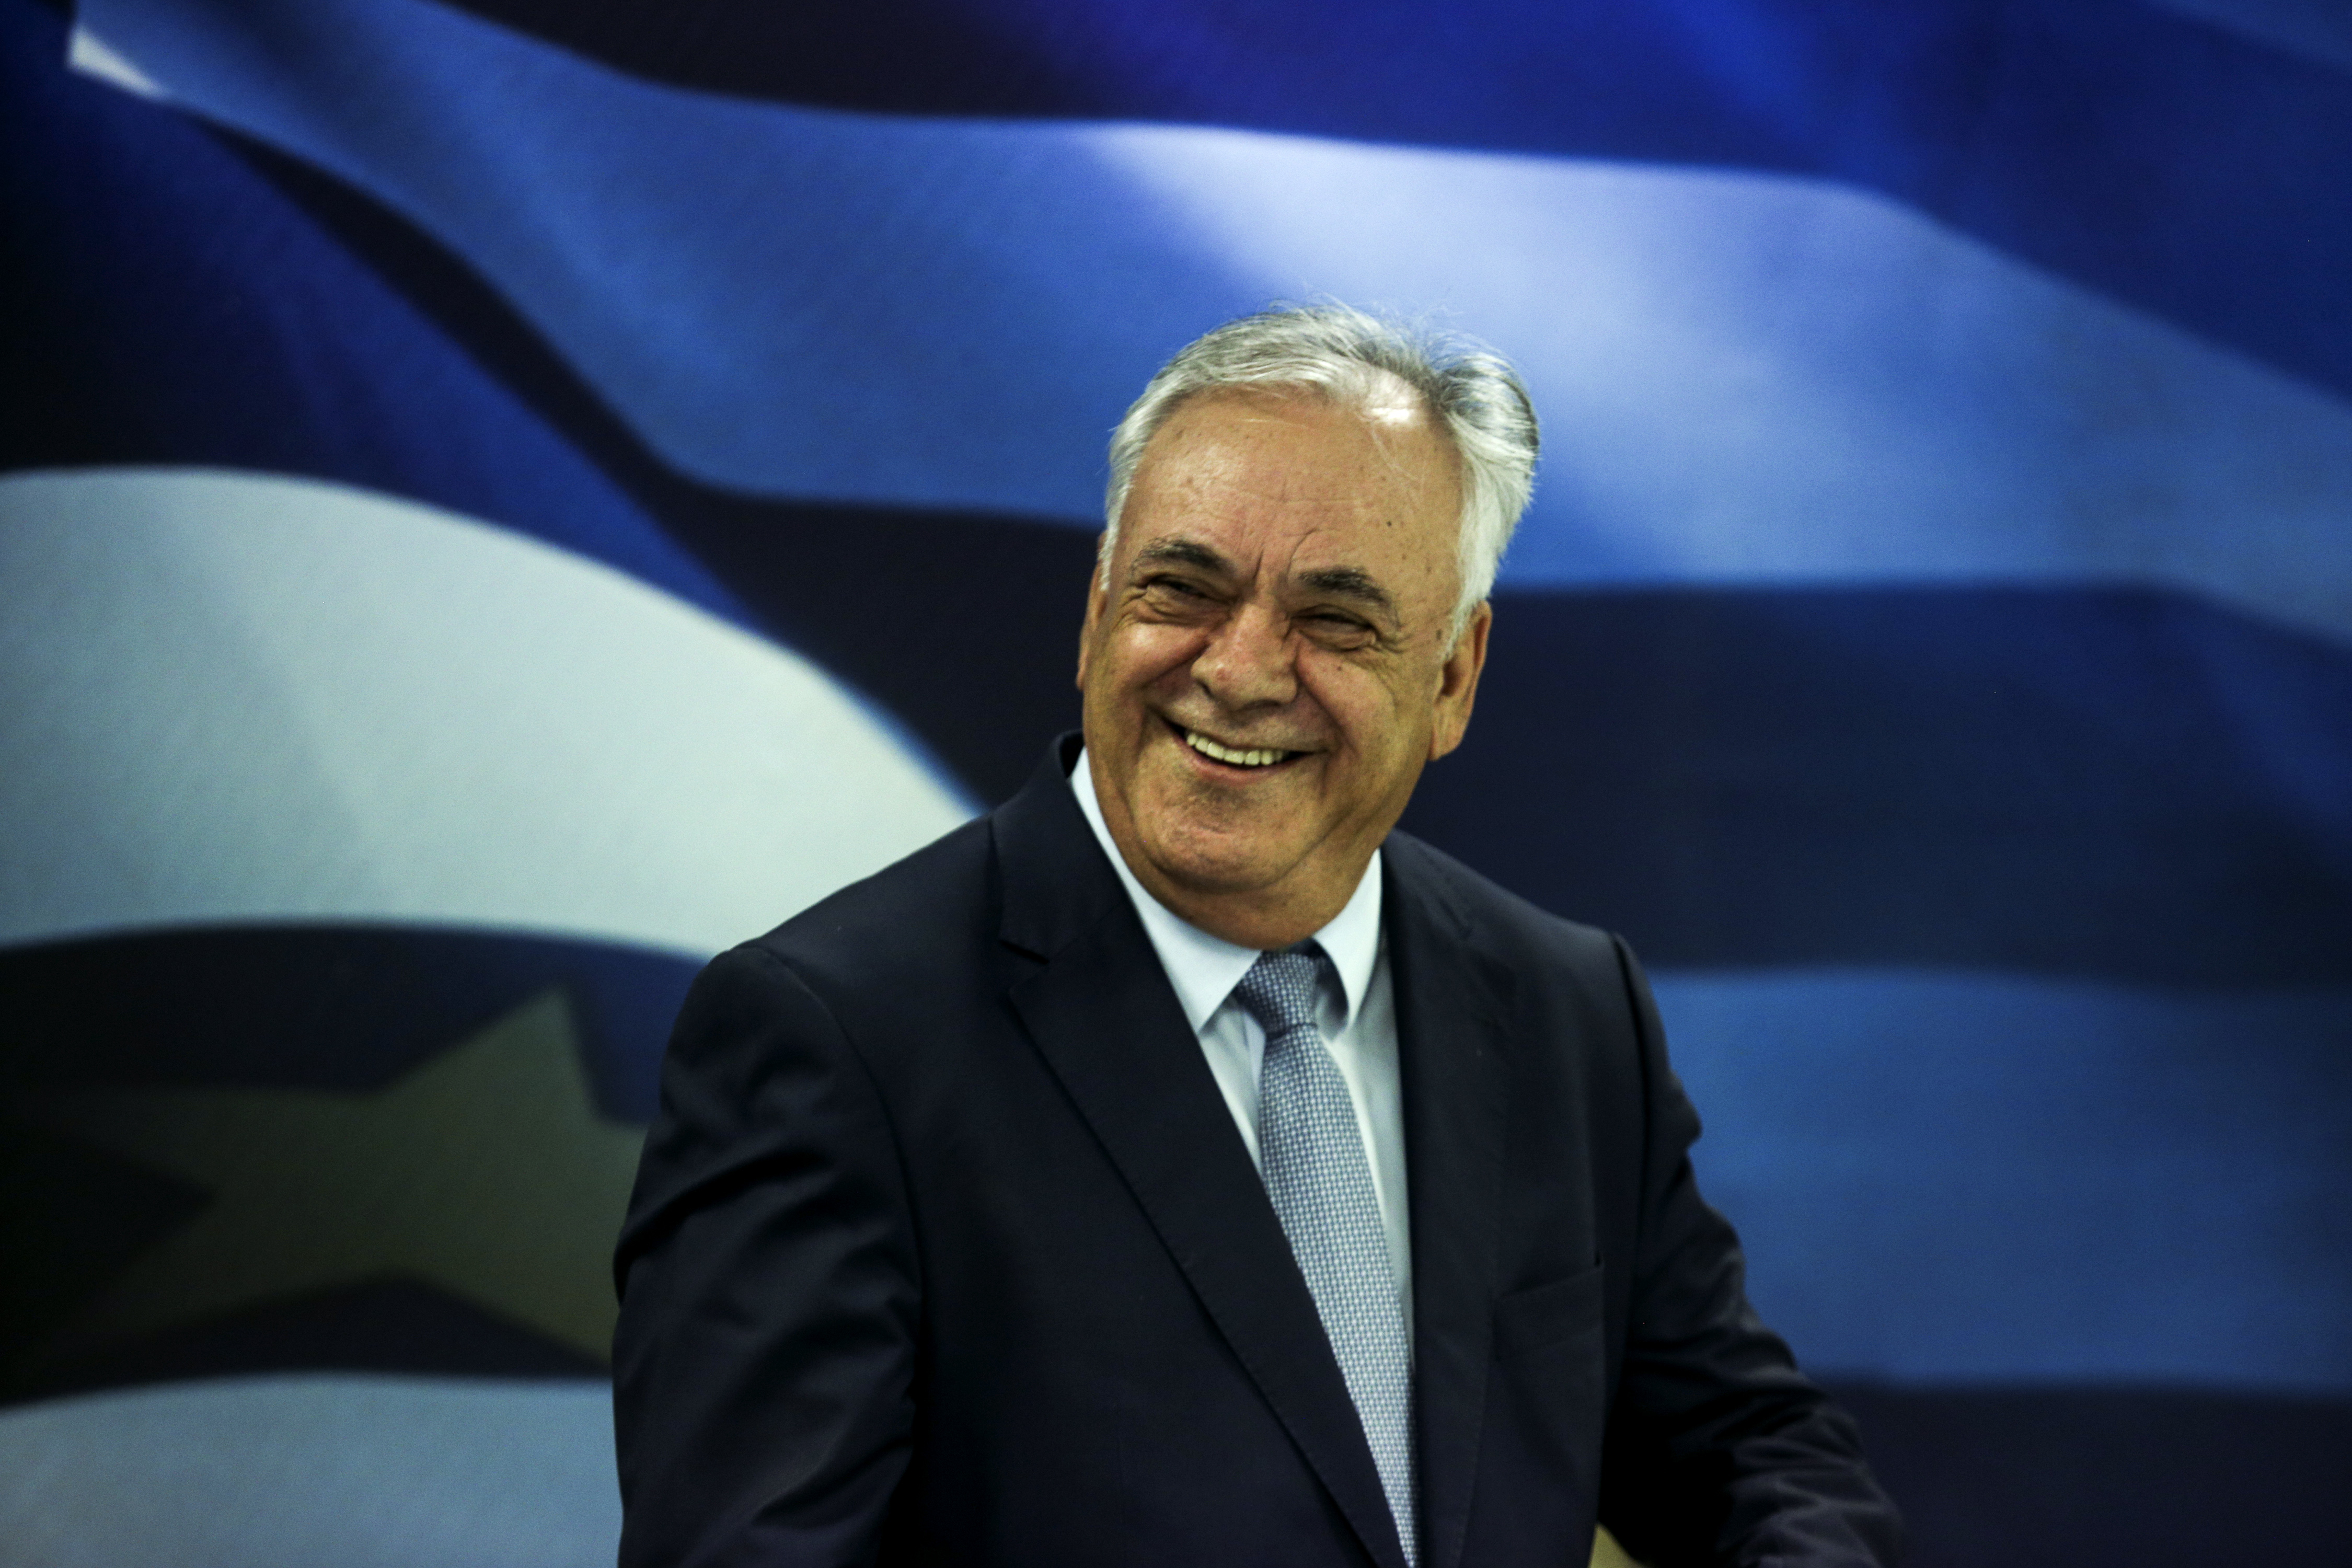 Dragasakis: There will be no pension cuts in the 2019 budget